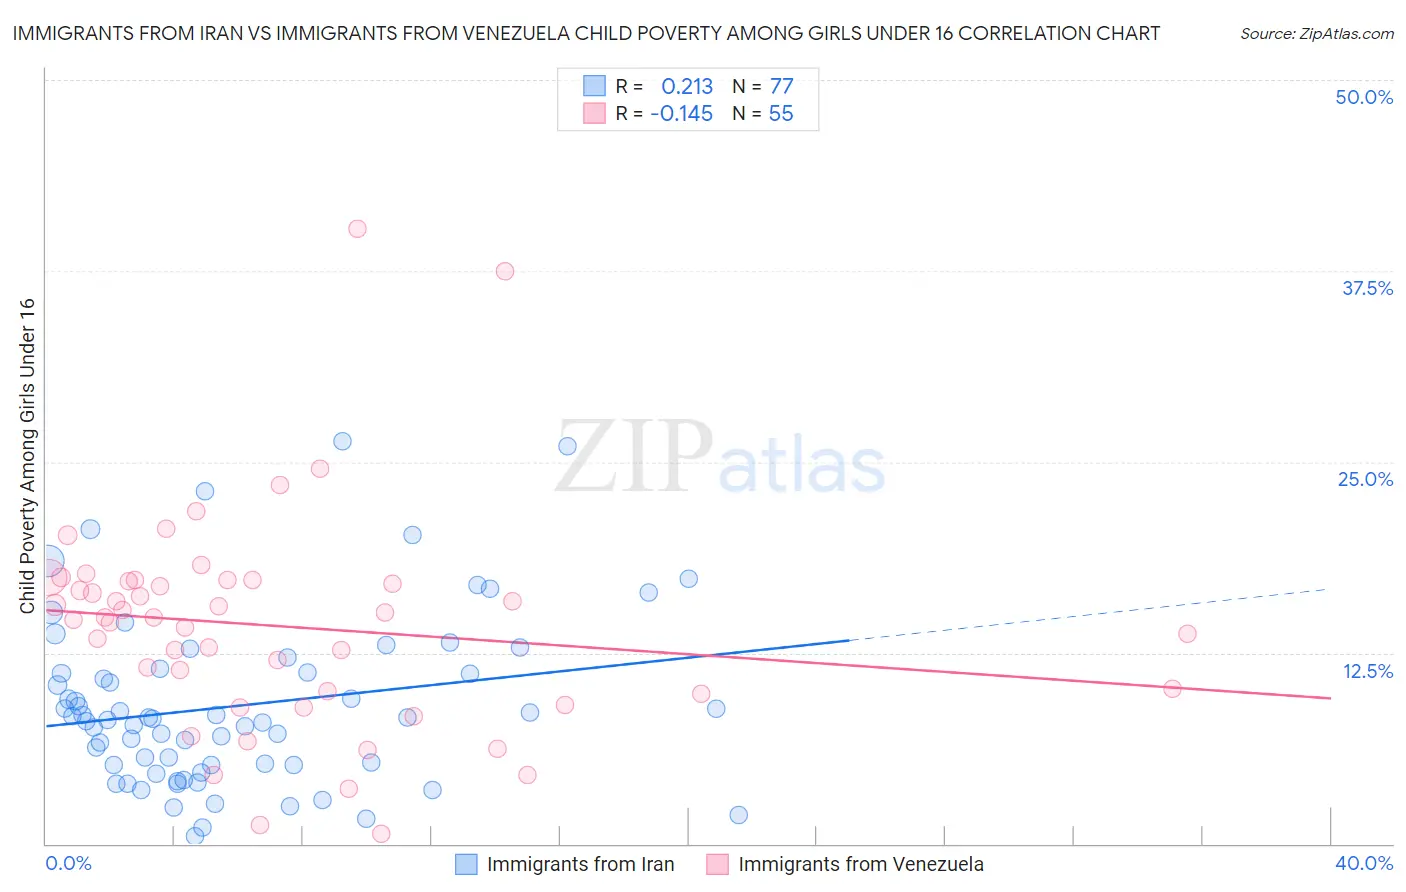 Immigrants from Iran vs Immigrants from Venezuela Child Poverty Among Girls Under 16